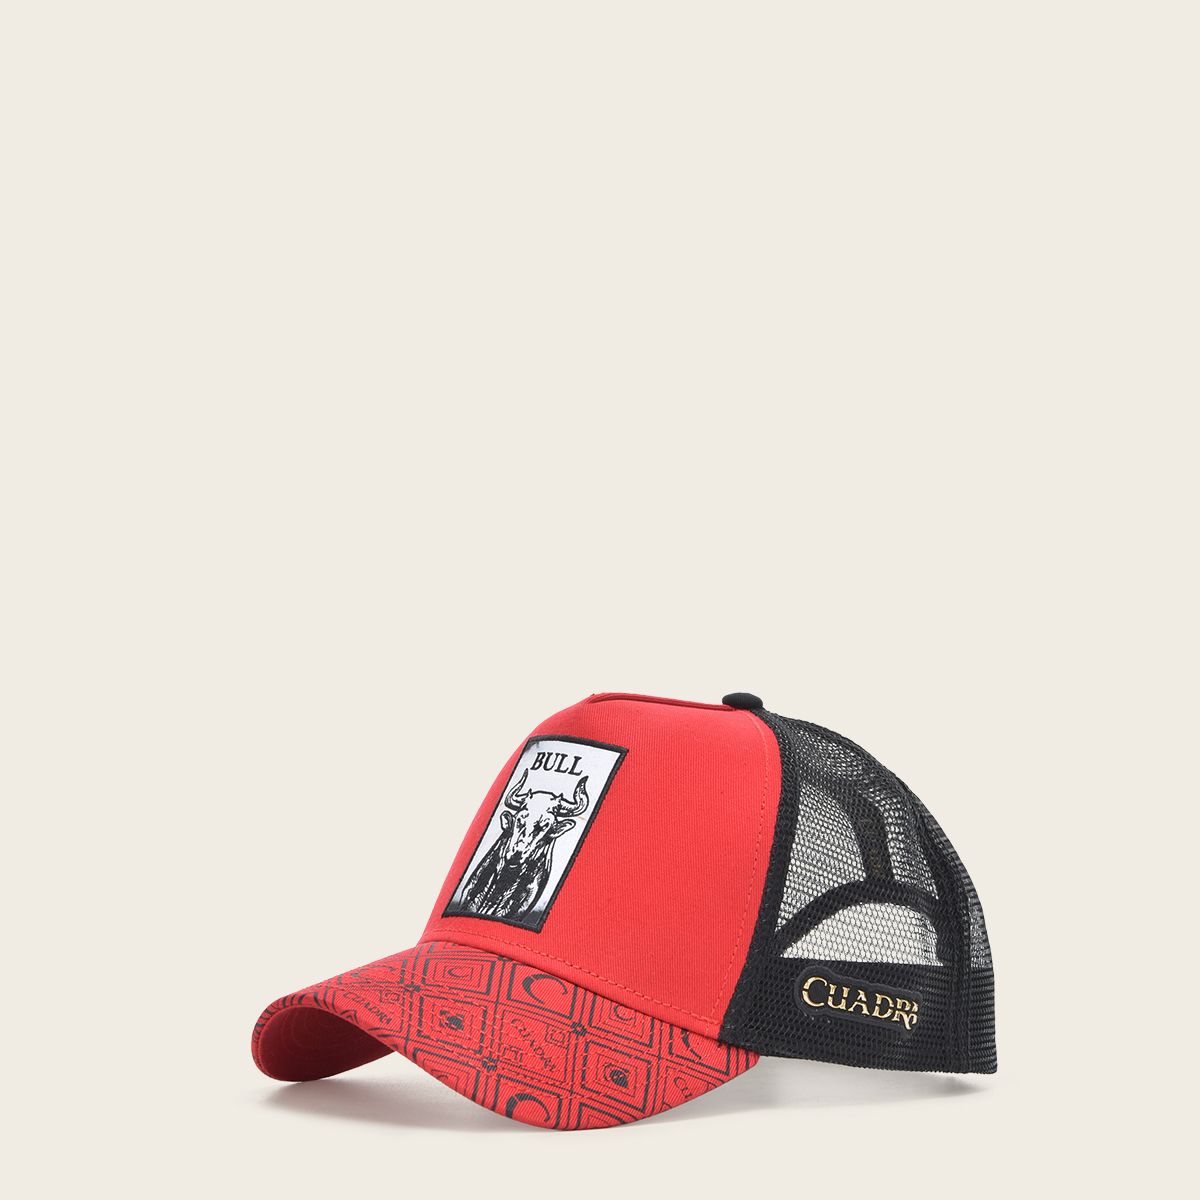 Cuadra red cap with embroidery bull patch